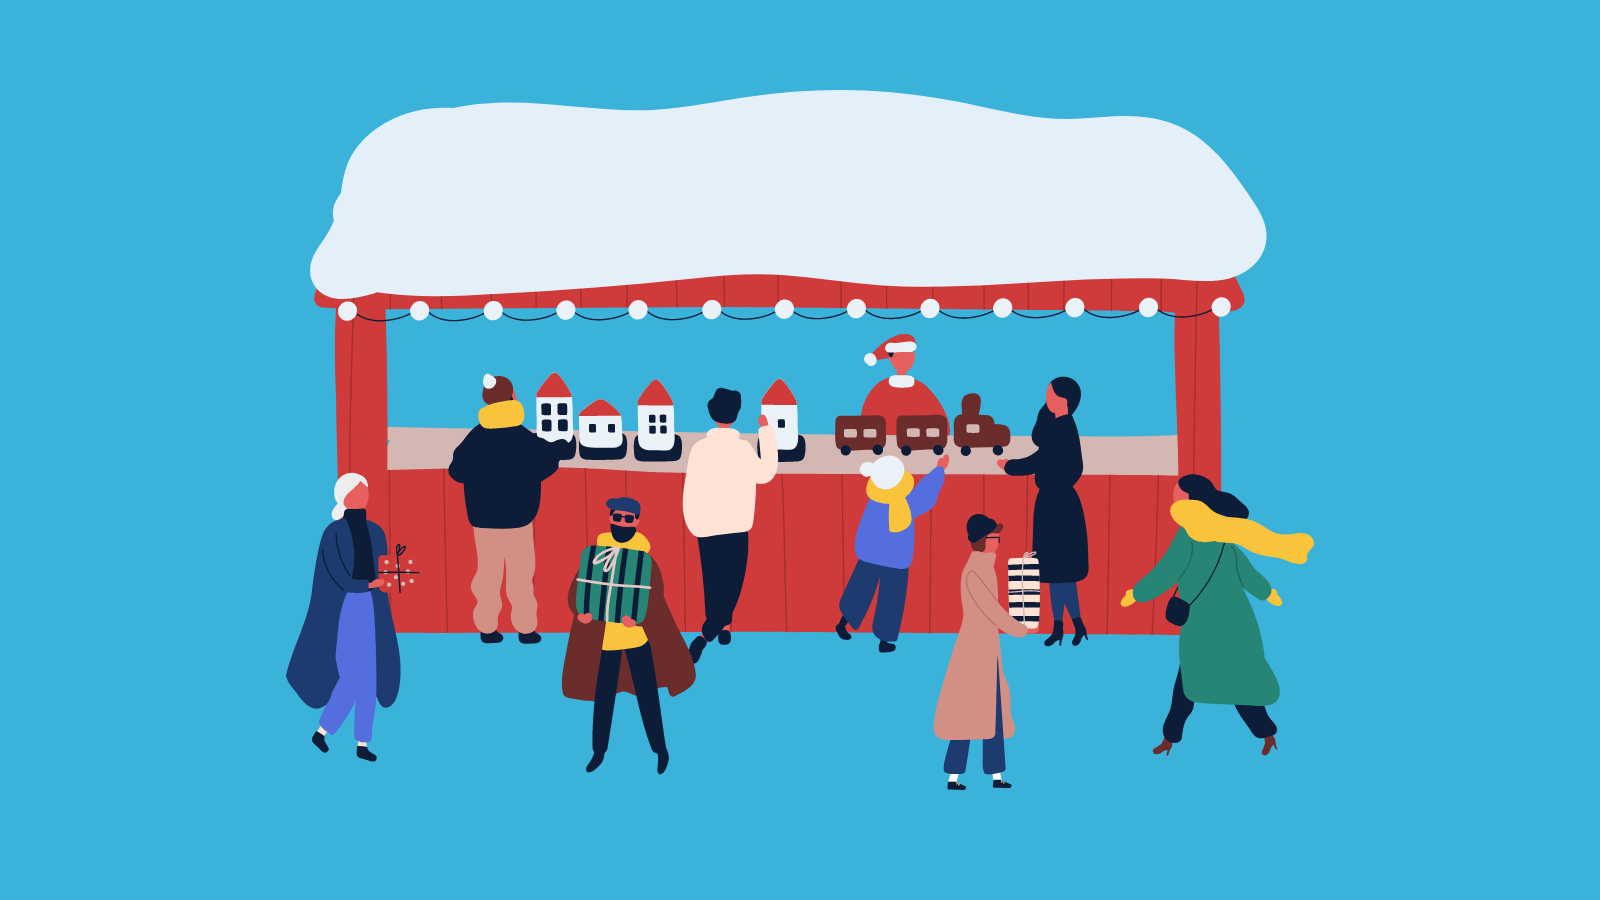 People looking in a window display that includes little houses, a train, and a person in a Santa hat